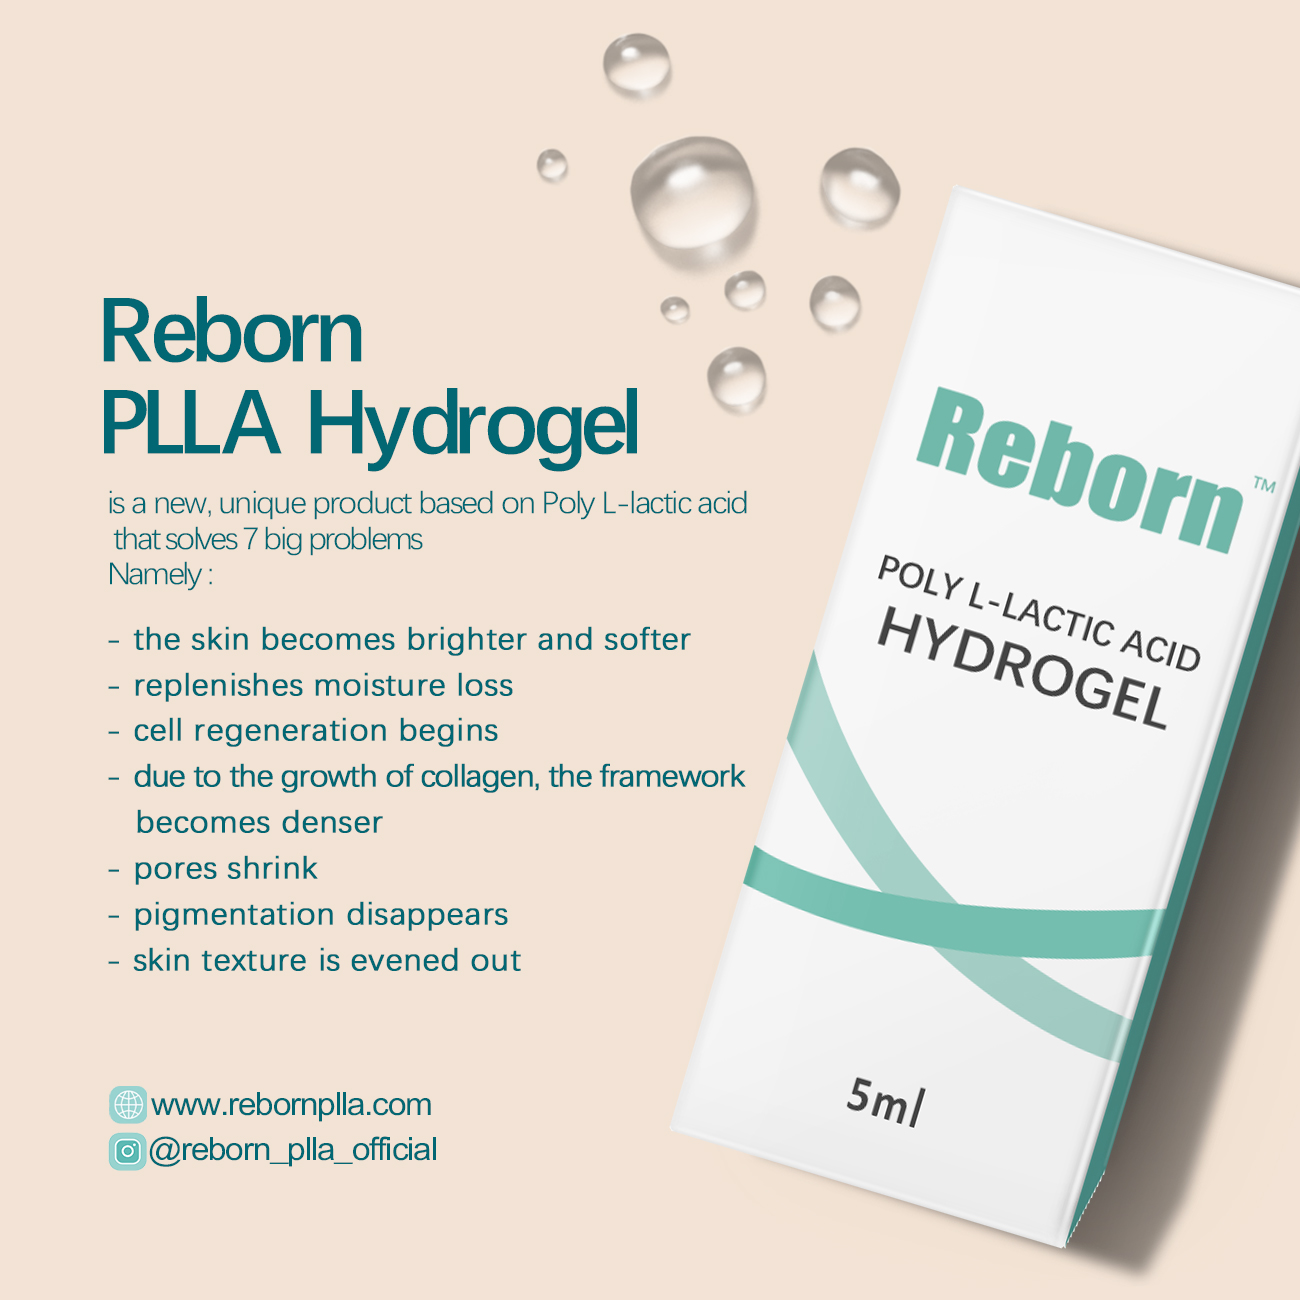 7 big problems will be solved with Reborn PLLA Hydrogel